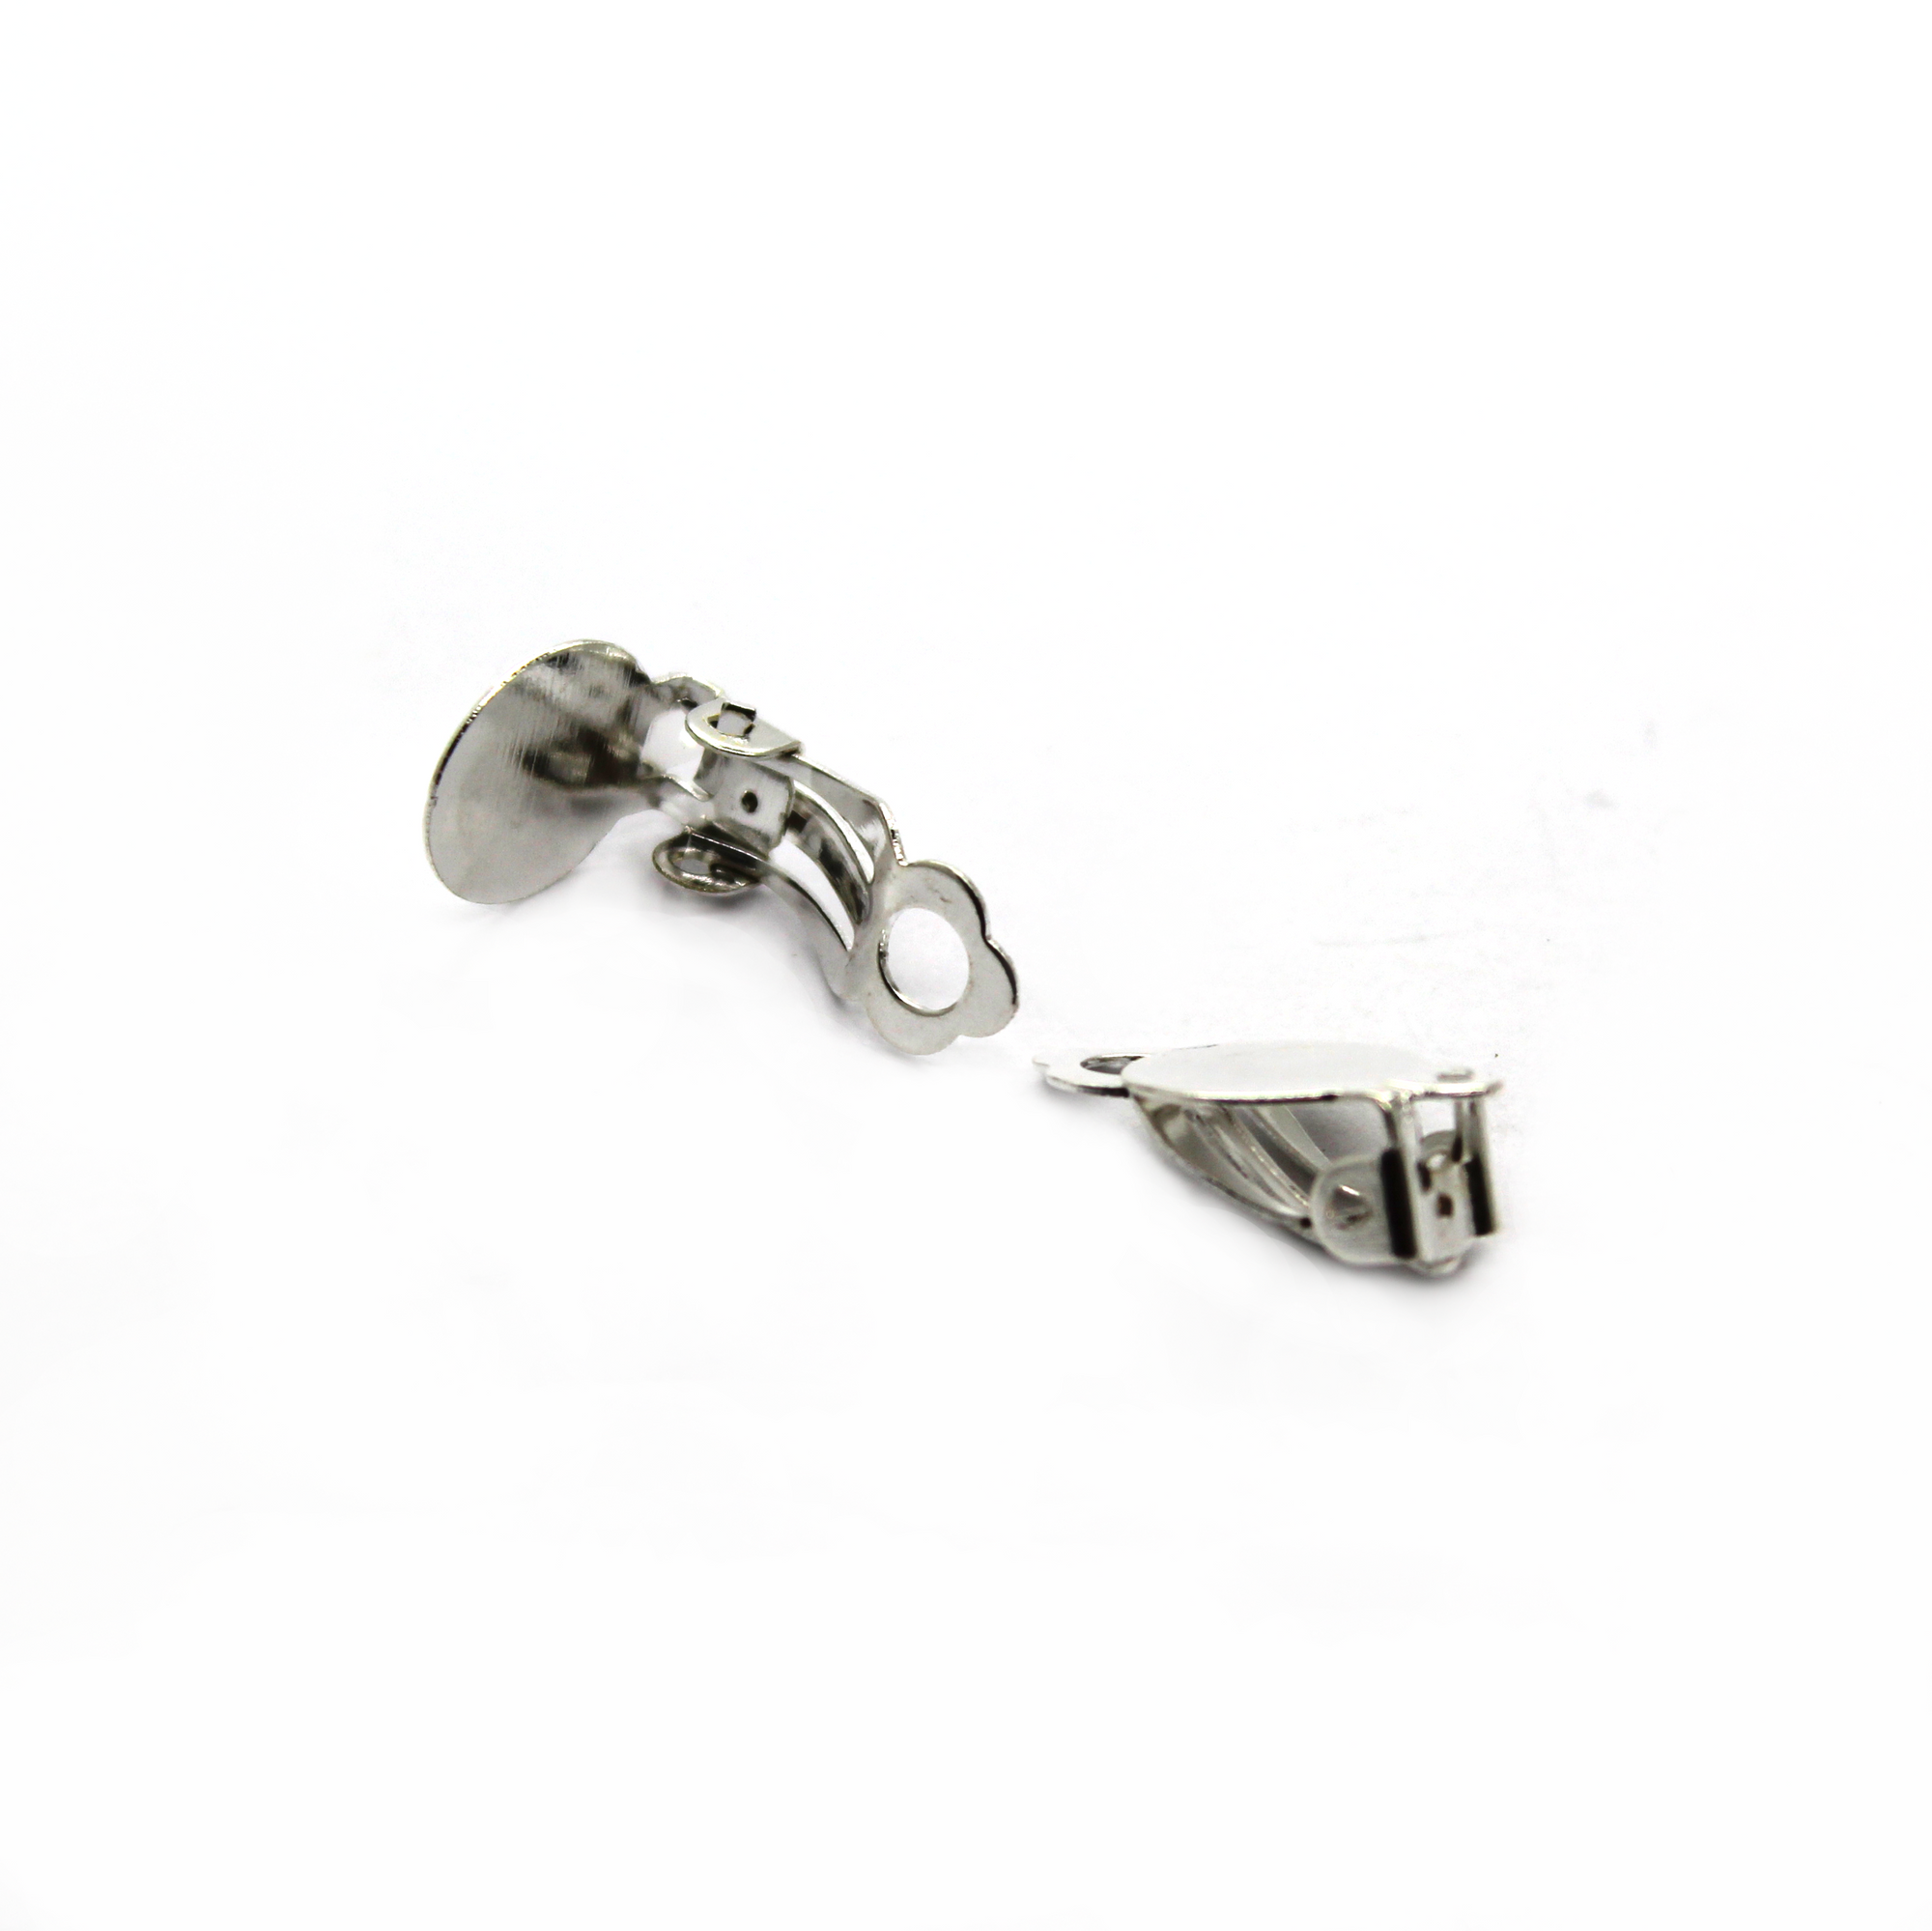 Earrings, Bright Silver, Alloy, Plain Clip-Ons, 10mm x 18mm, sold per pkg of 4 pairs